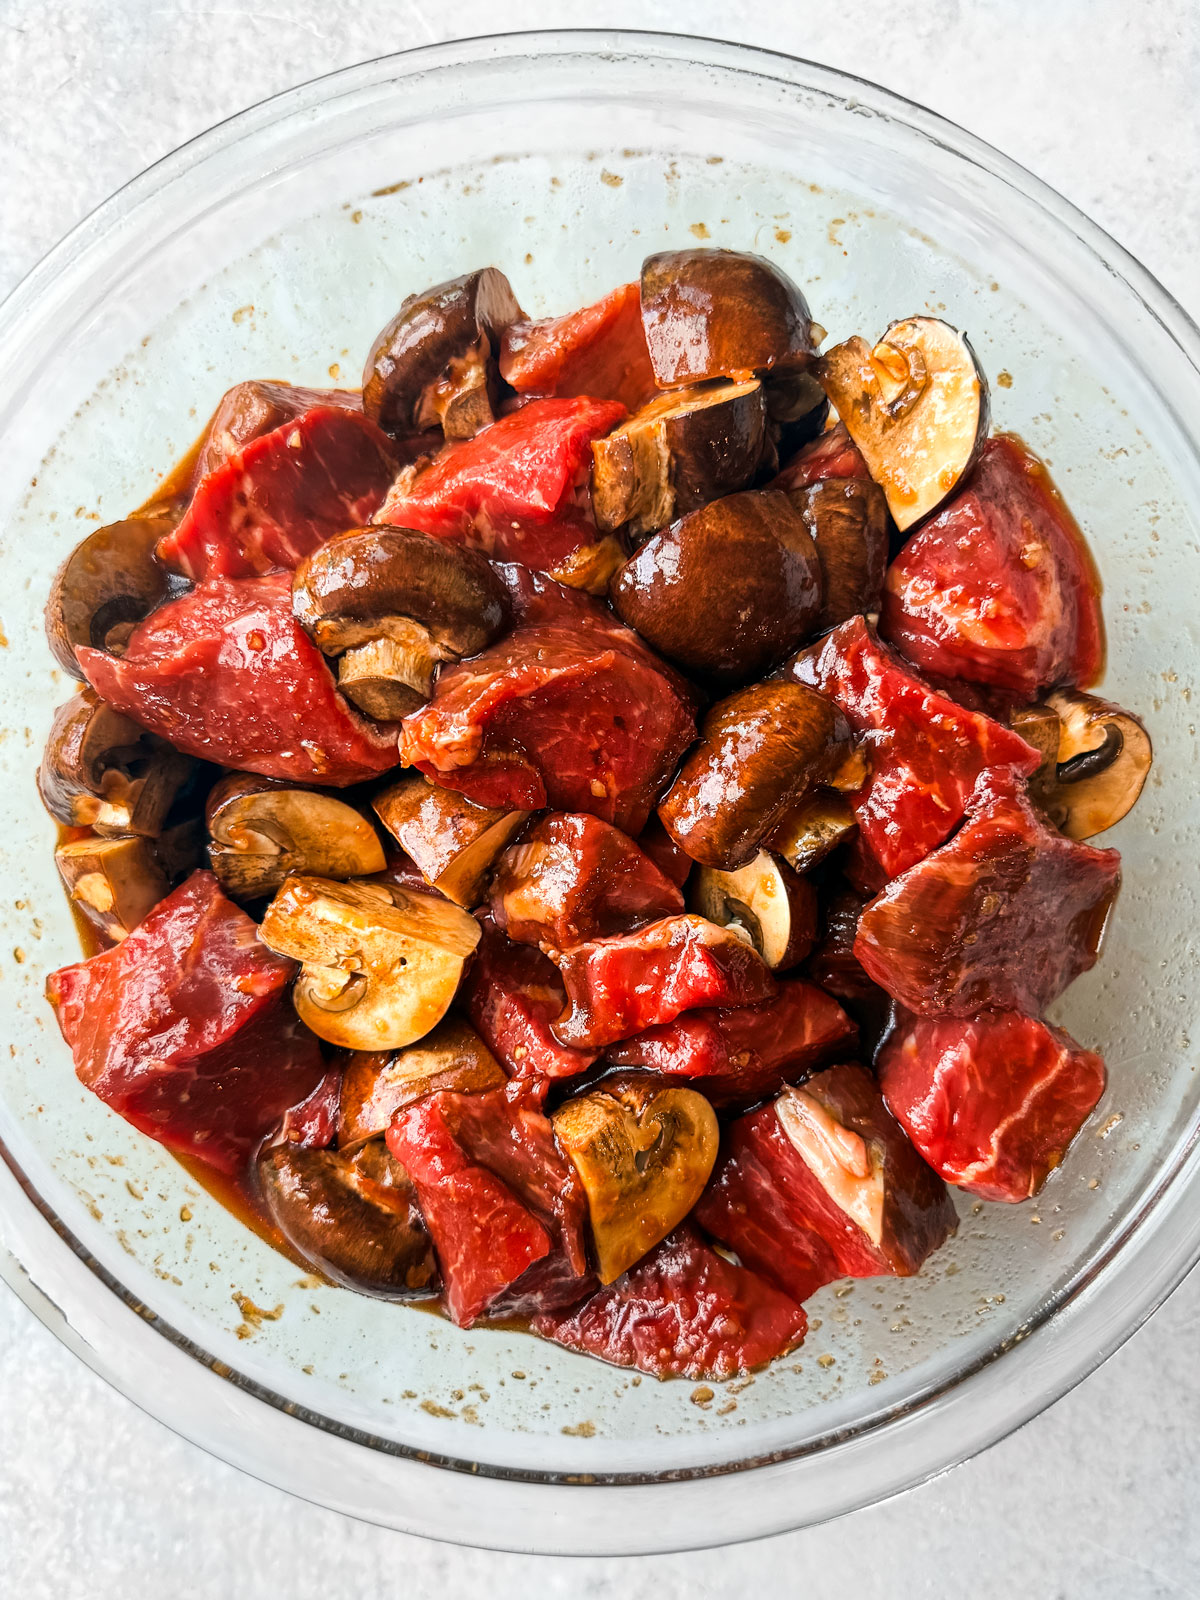 Beef chunks and mushrooms in a mixing bowl marinating.